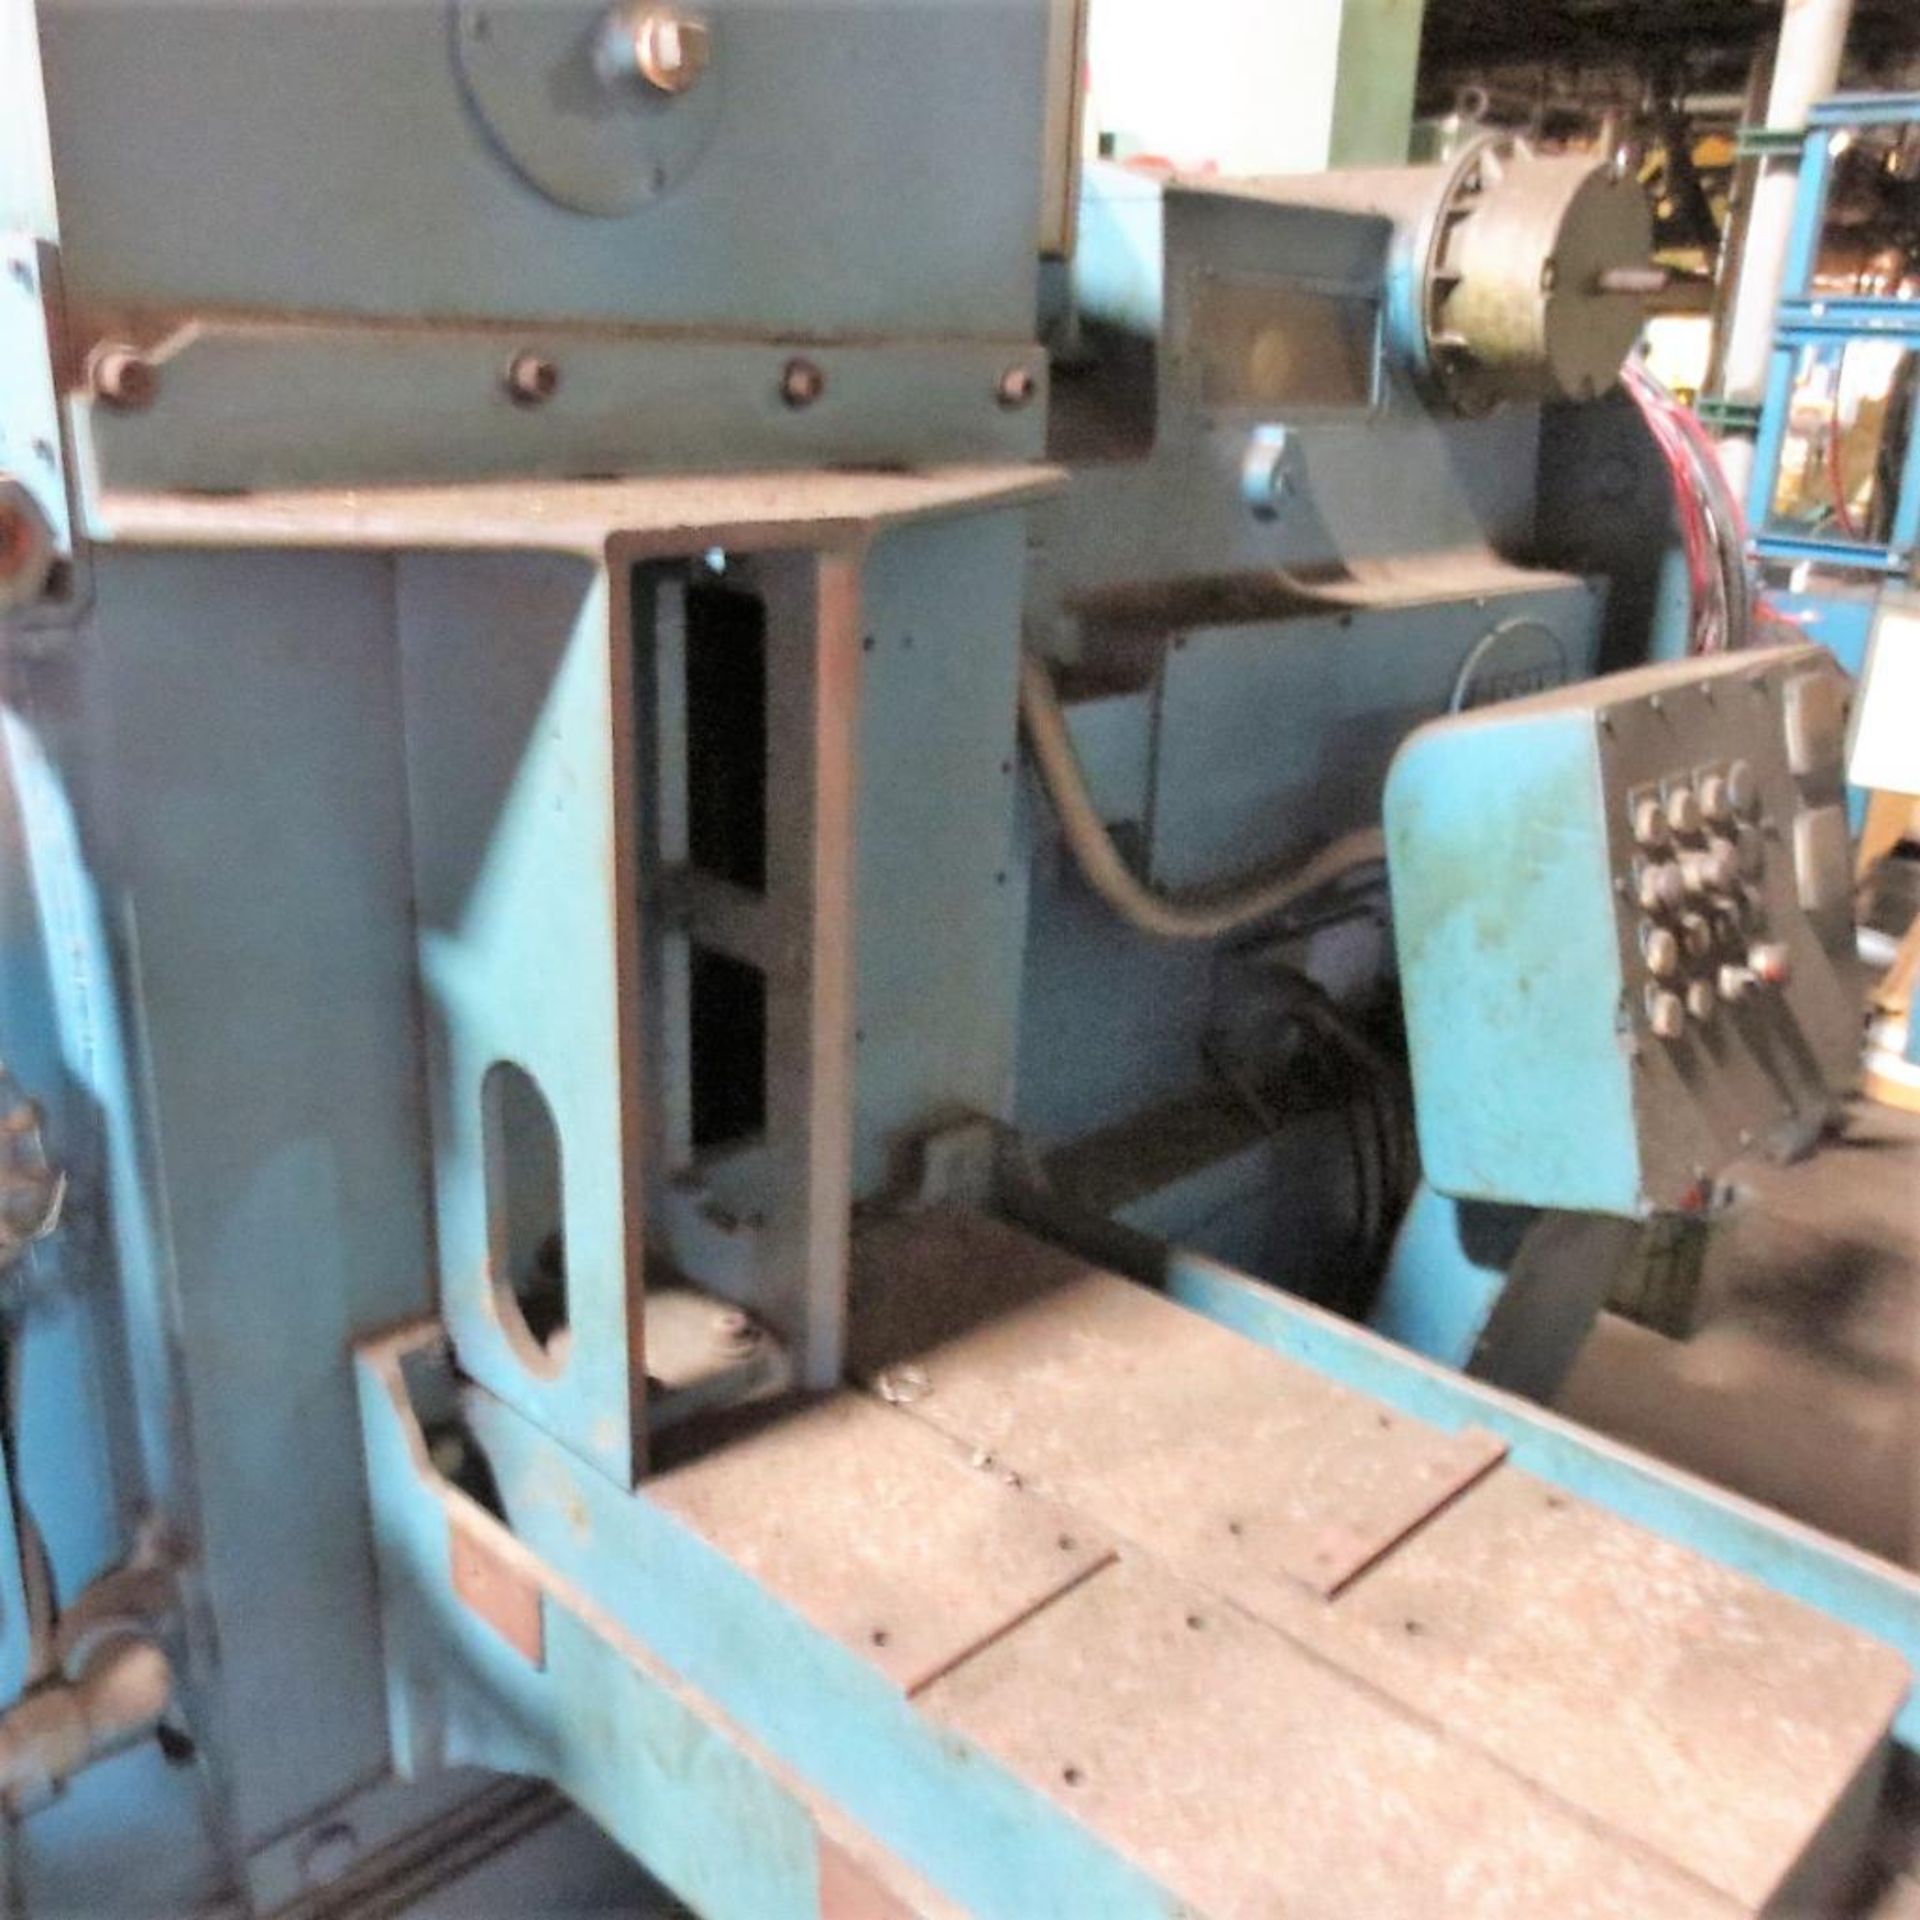 Besly Double Disc Grinder, (1) Motor Drives, Push-Button Controls. Loading Fee is $950.00 - Image 3 of 9